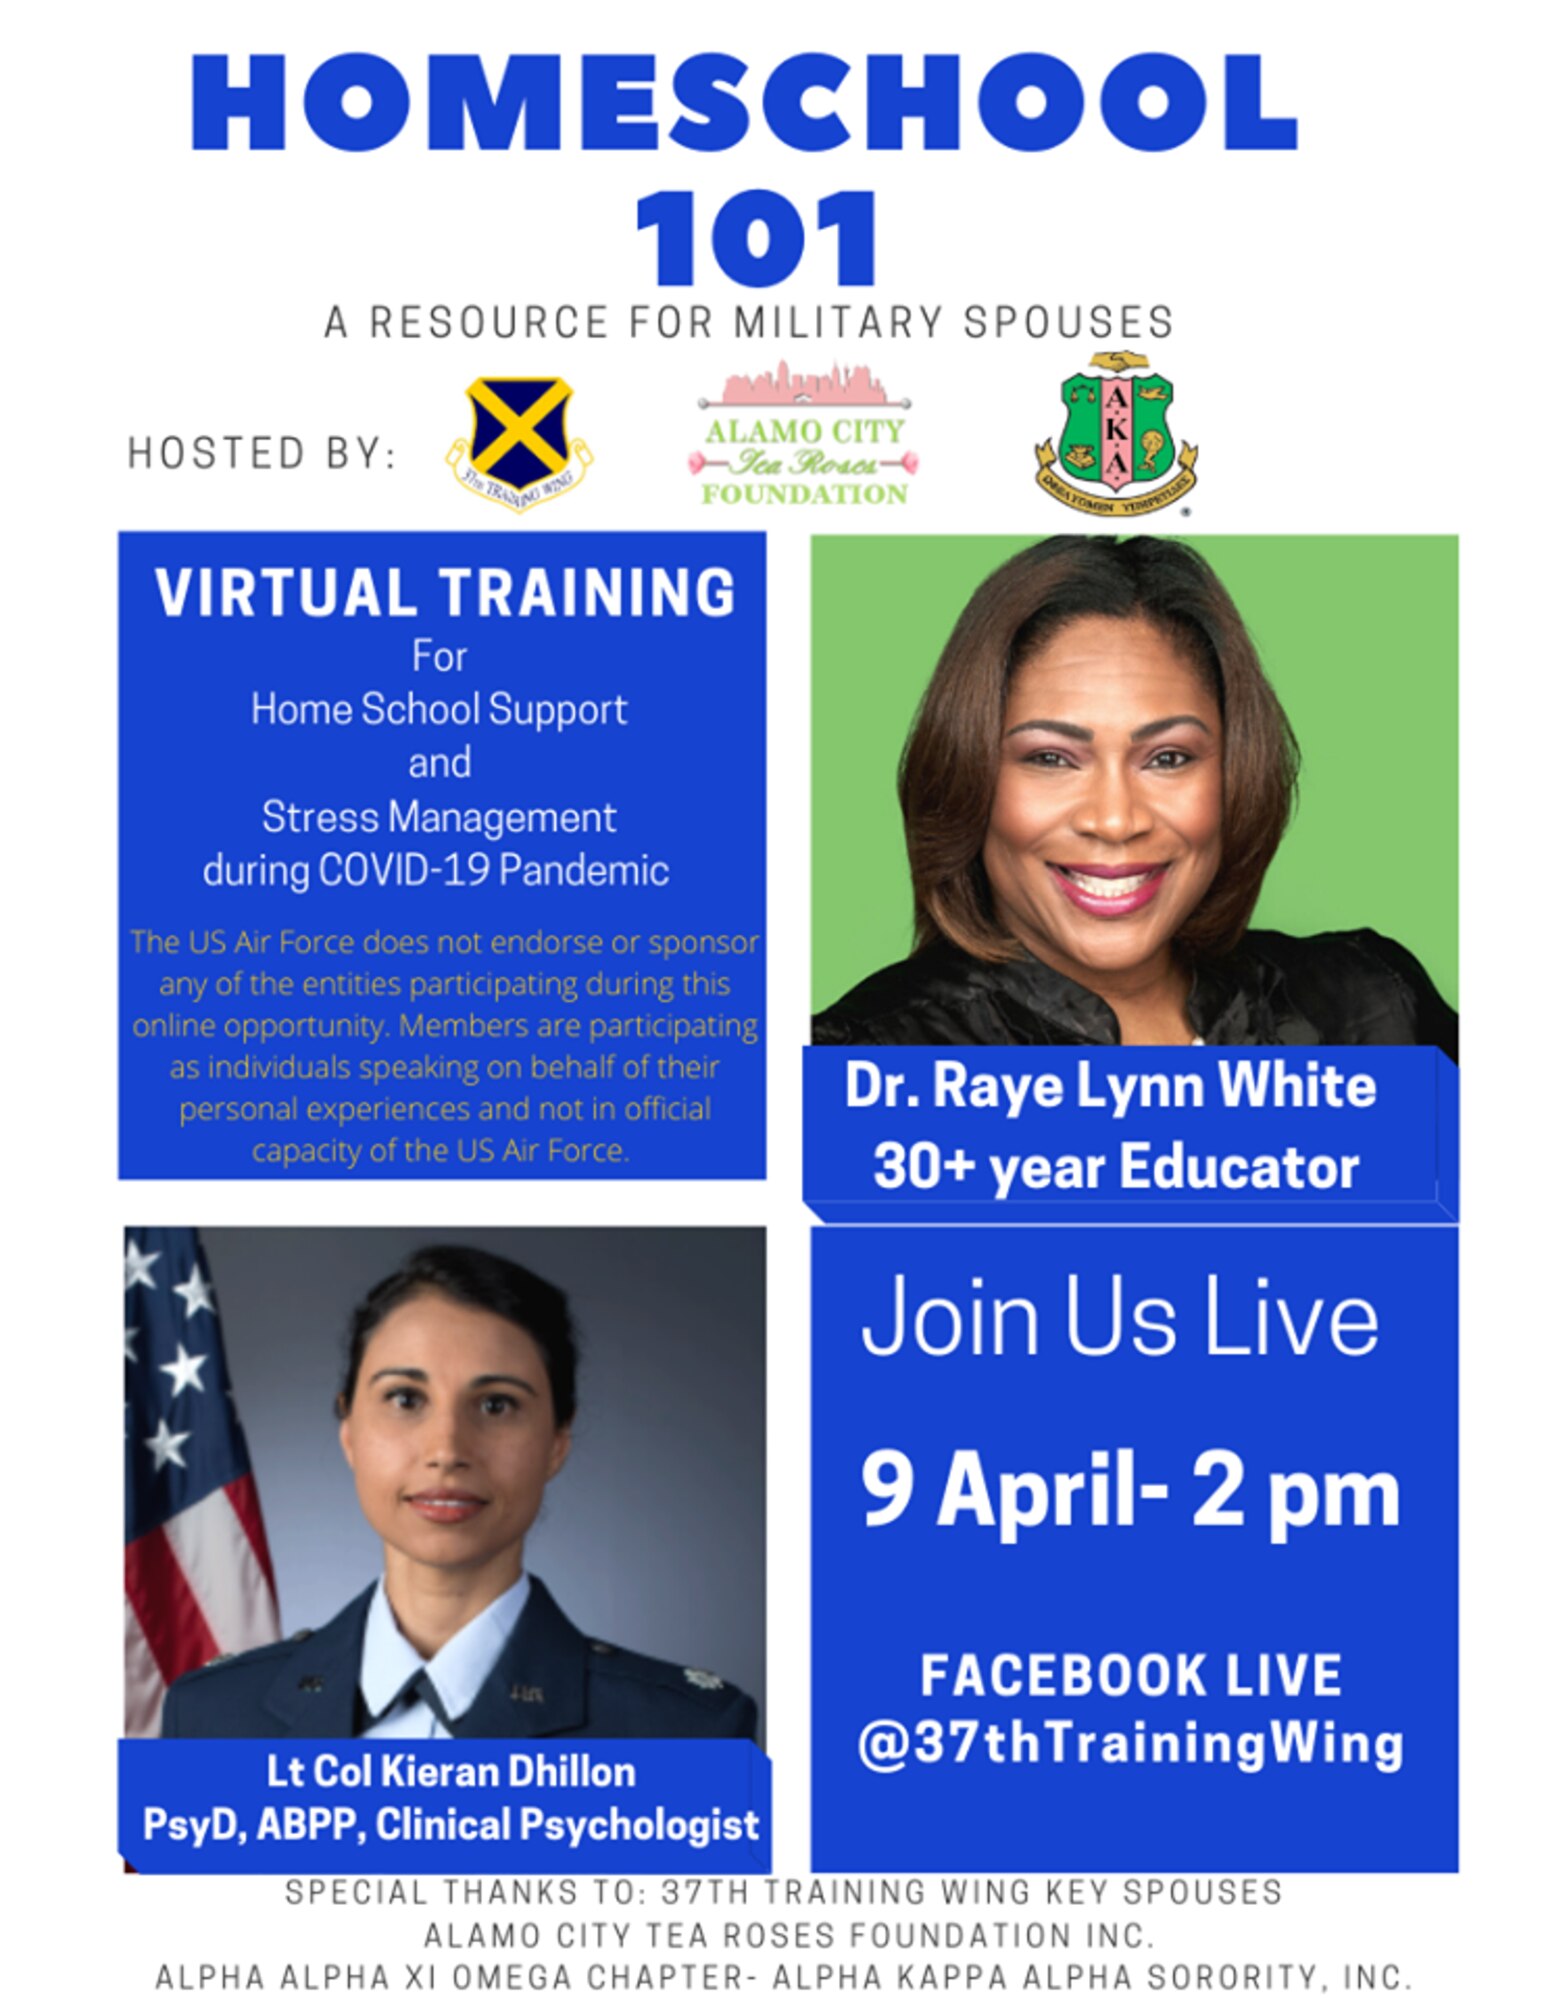 37 TRW is excited to share an opportunity for our families, a Live Facebook event hosted by the 37 TRW this Thursday, April 9, at 2 p.m.  There will be three guest speakers, Dr White, Lt Col Dhillon, and Mrs. Leslie Janaros.